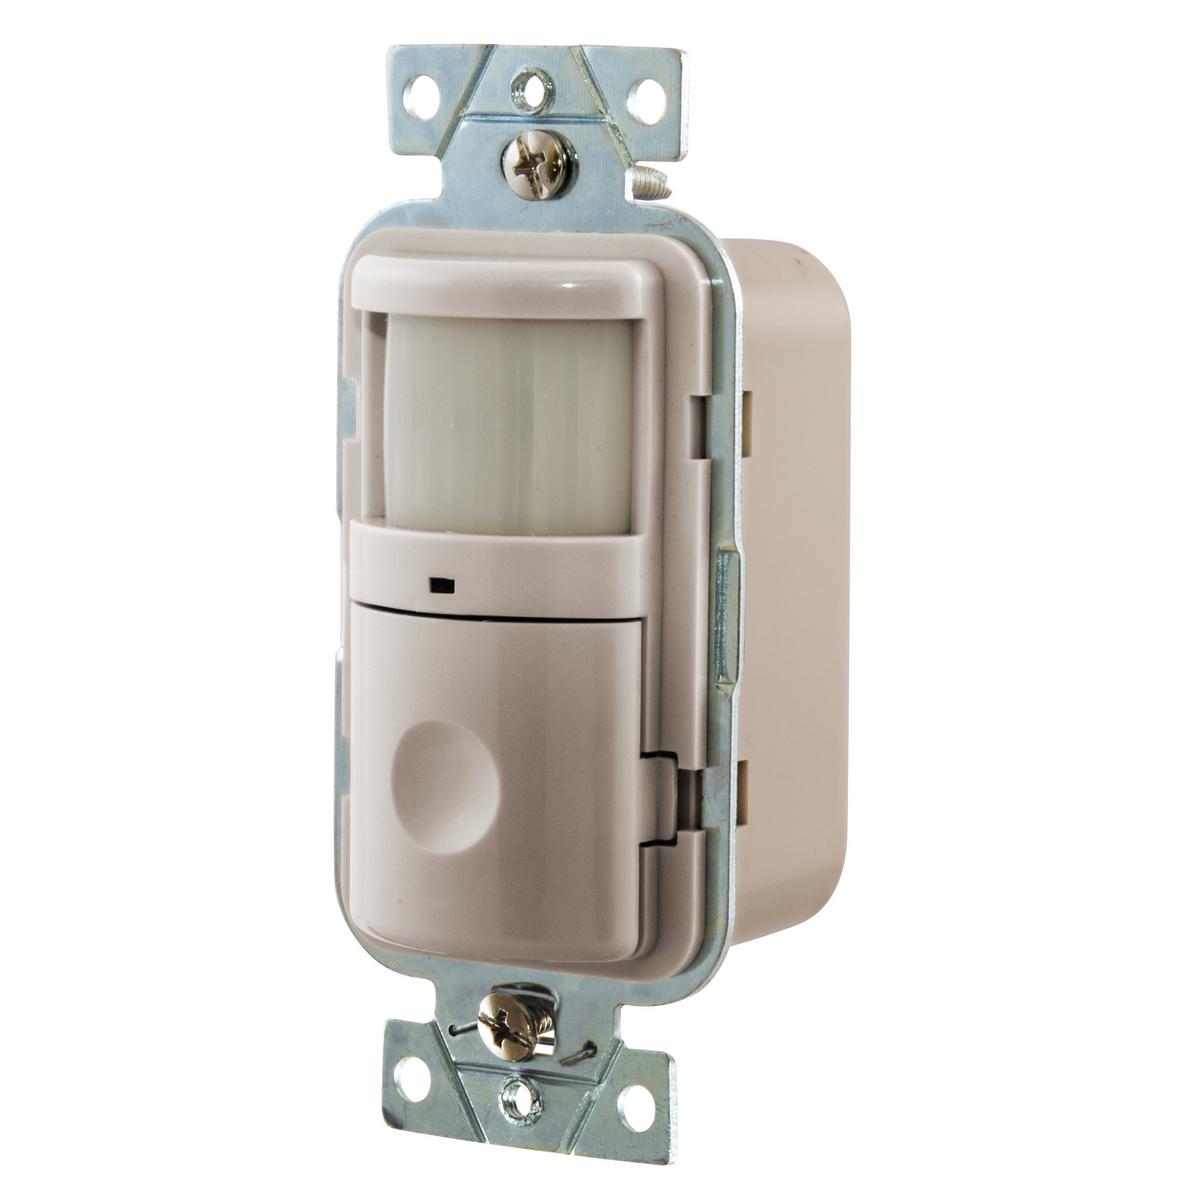 Hubbell WS2000LA Lighting Controls, Occupancy/Vacancy Sensors, Wall Switch, Passive Infrared Technology, 120/277V AC, Light Almond  ; Designed for use on 120 or 277V AC circuits, no neutral required, fast retrofits. Built in photocell prevents lights from turning ON with 